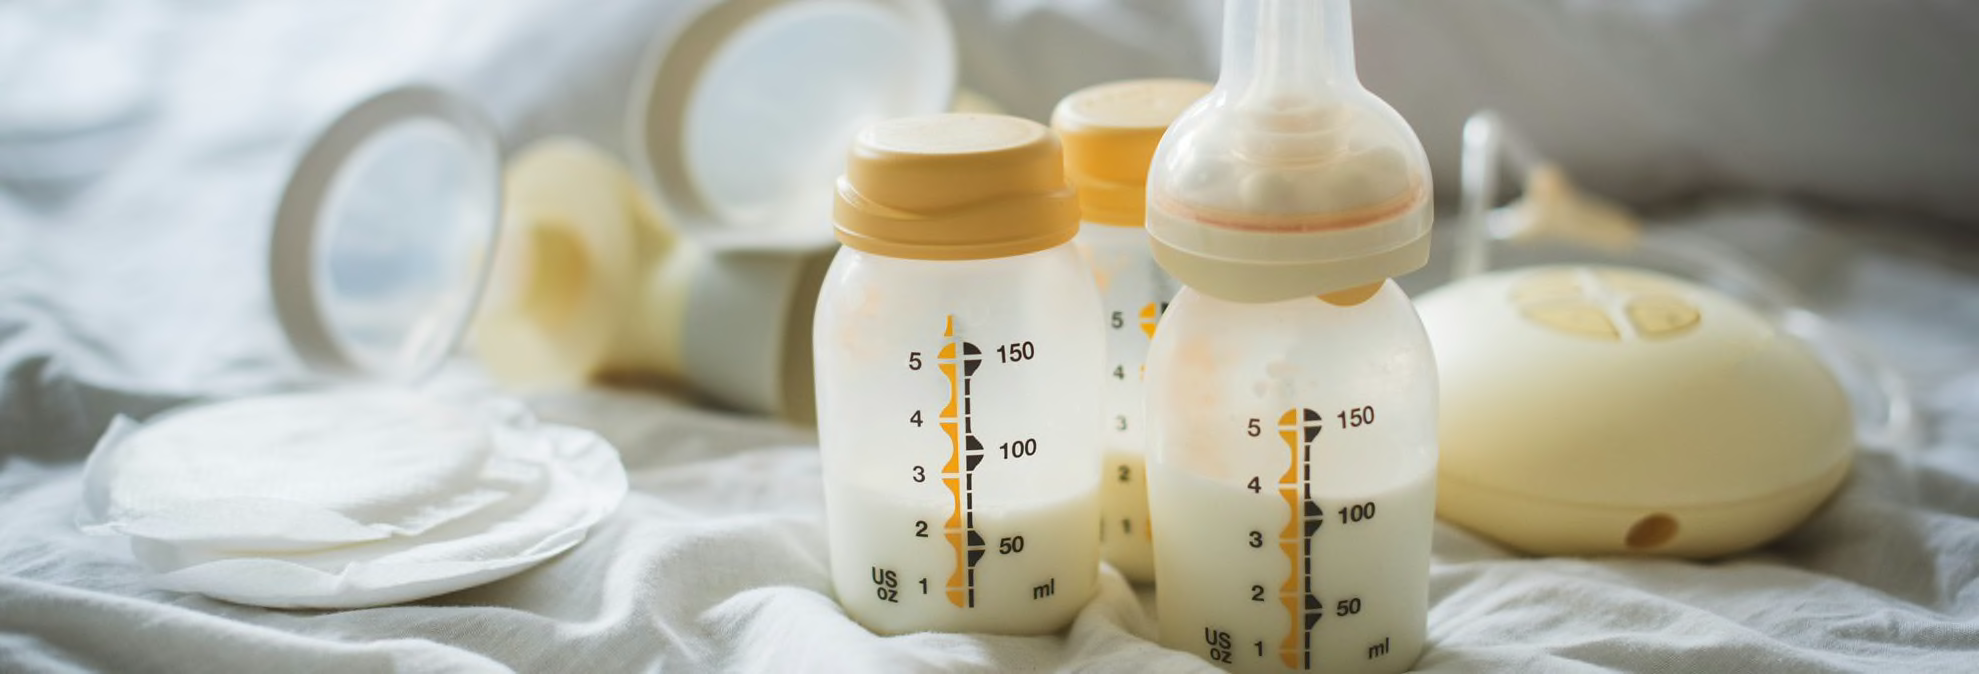 baby bottles with breast pump in background